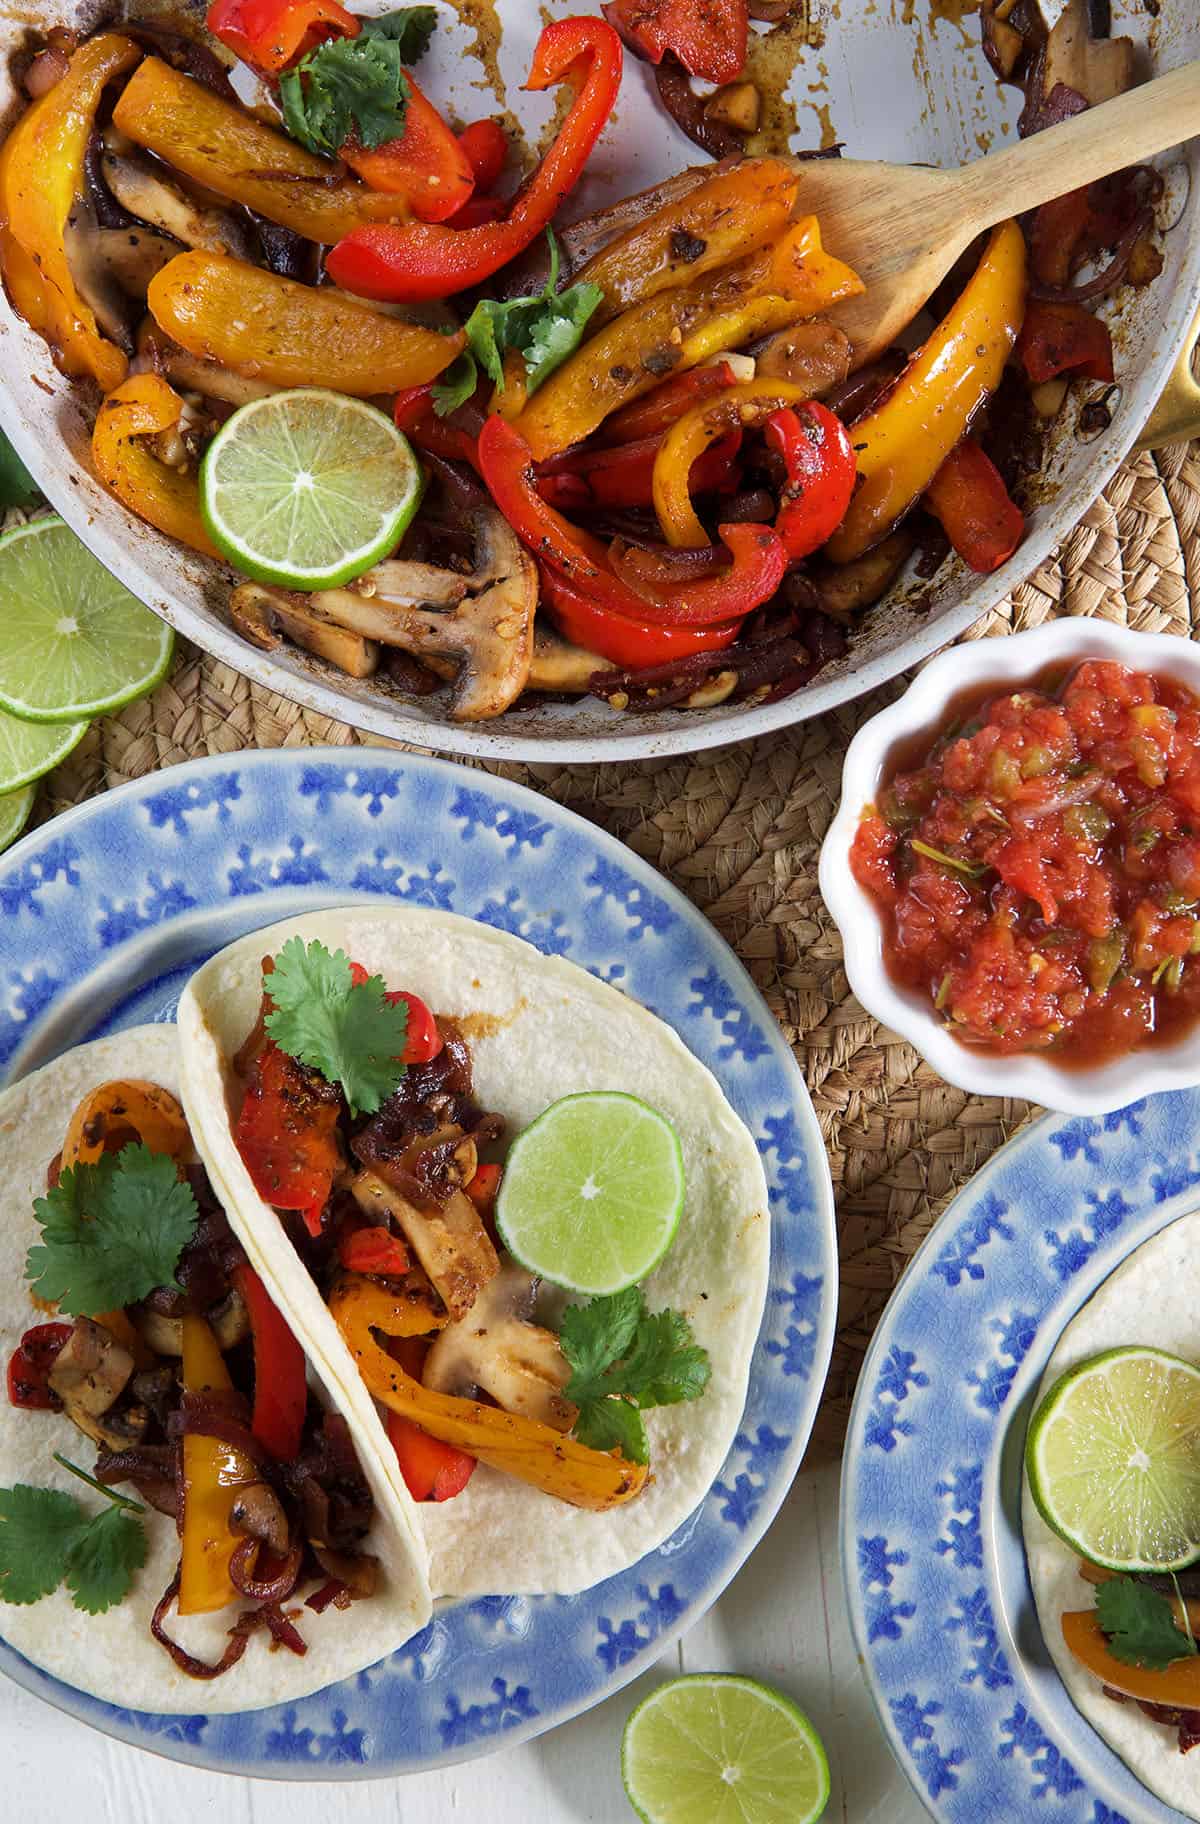 Peppers are being cooked in a pan next to a plate with two fajitas on it.